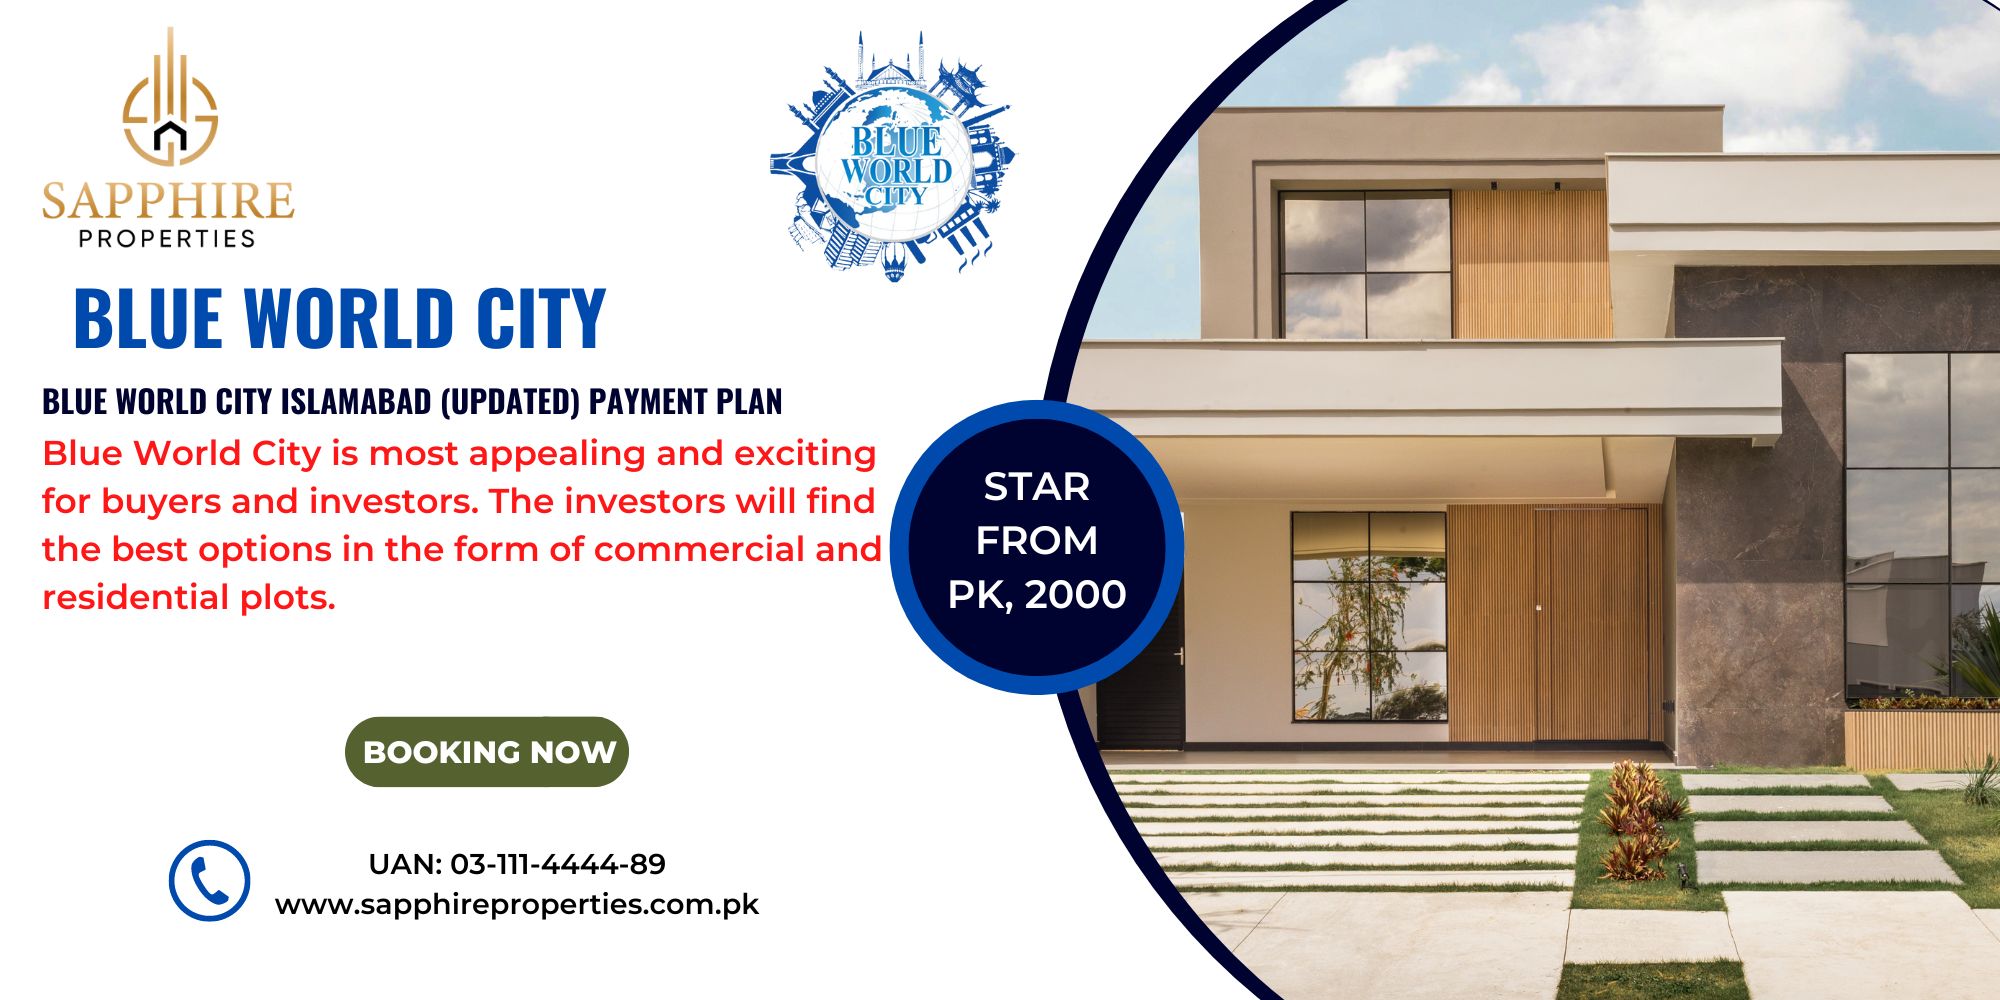 Blue World City Islamabad (UPDATED) Payment Plan